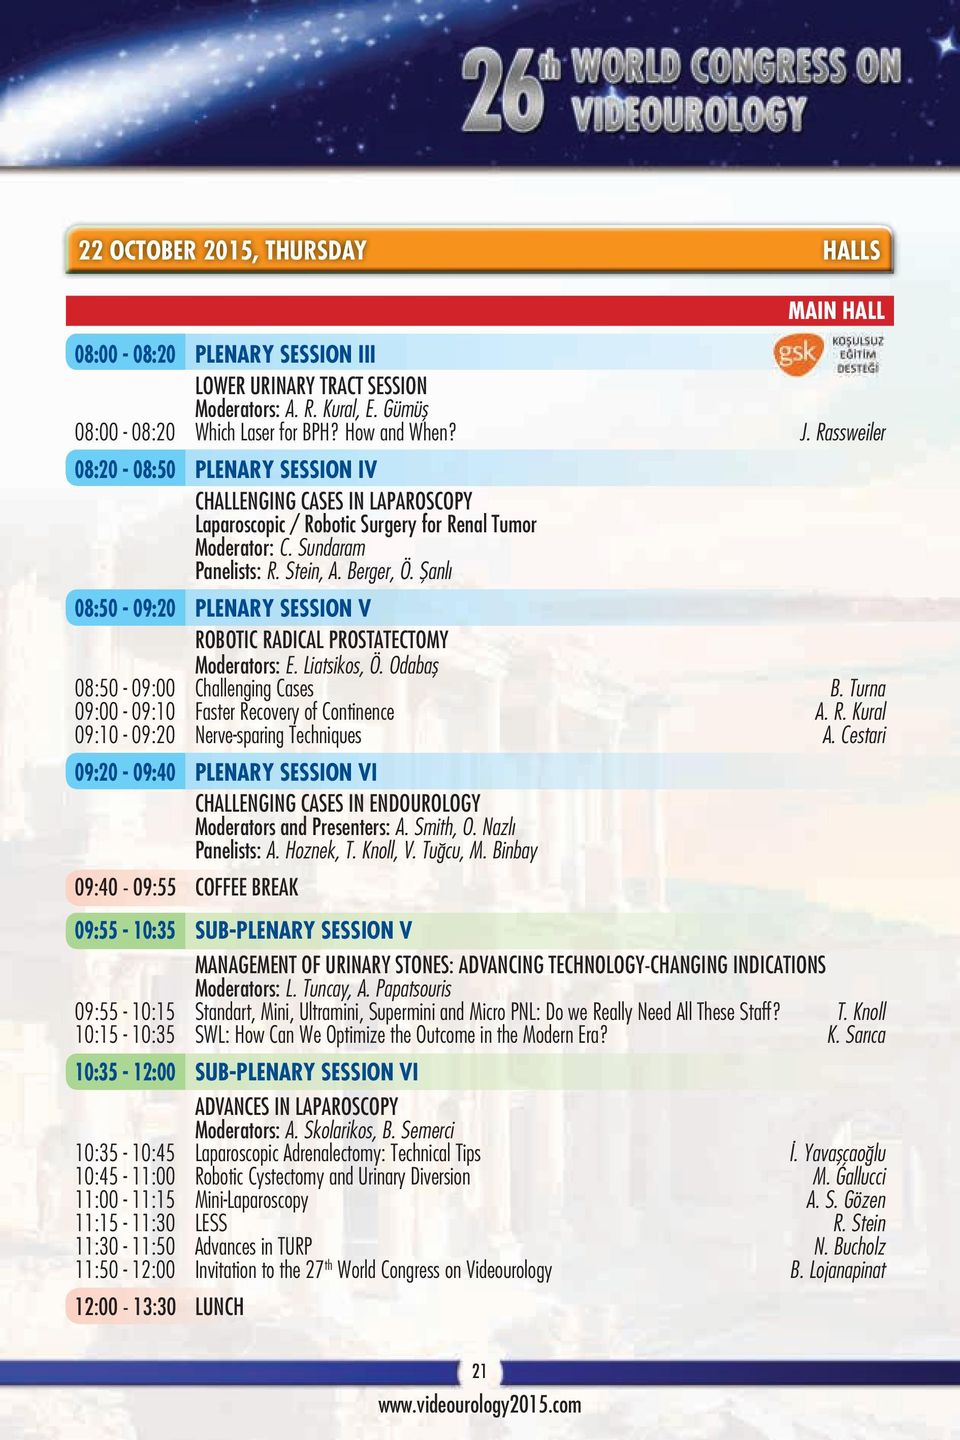 Şanlı 08:50-09:20 PLENARY SESSION V ROBOTIC RADICAL PROSTATECTOMY Moderators: E. Liatsikos, Ö. Odabaş 08:50-09:00 Challenging Cases B. Turna 09:00-09:10 Faster Recovery of Continence A. R. Kural 09:10-09:20 Nerve-sparing Techniques A.